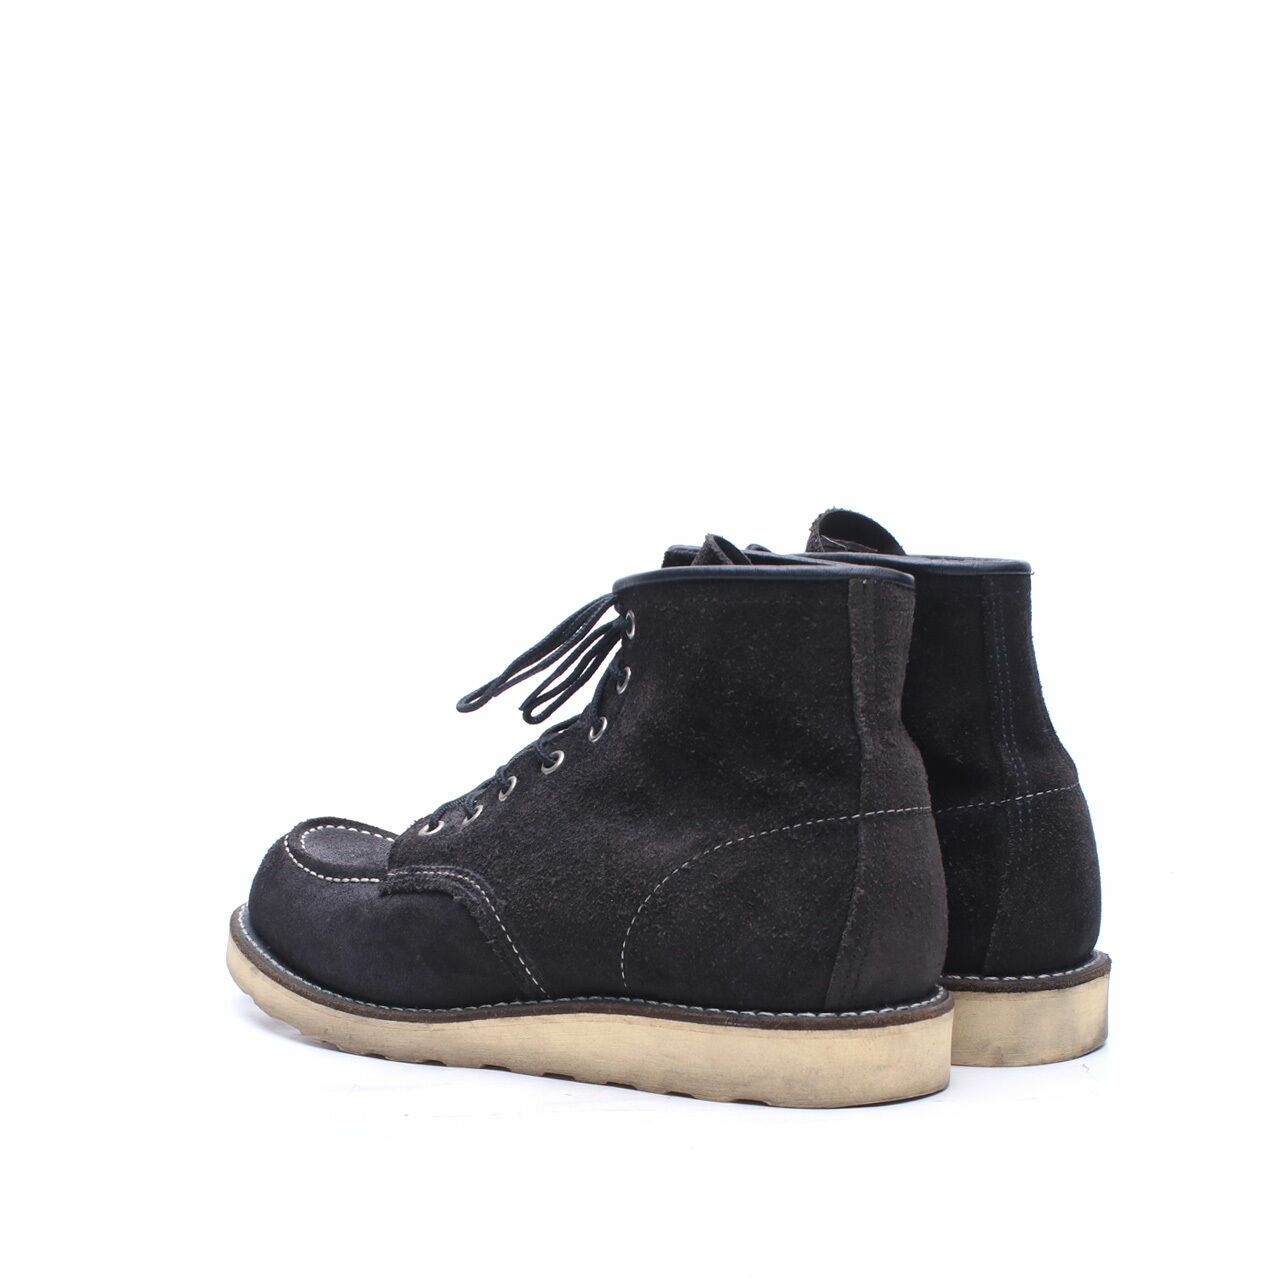 Red Wing Shoes Black Suede Boots